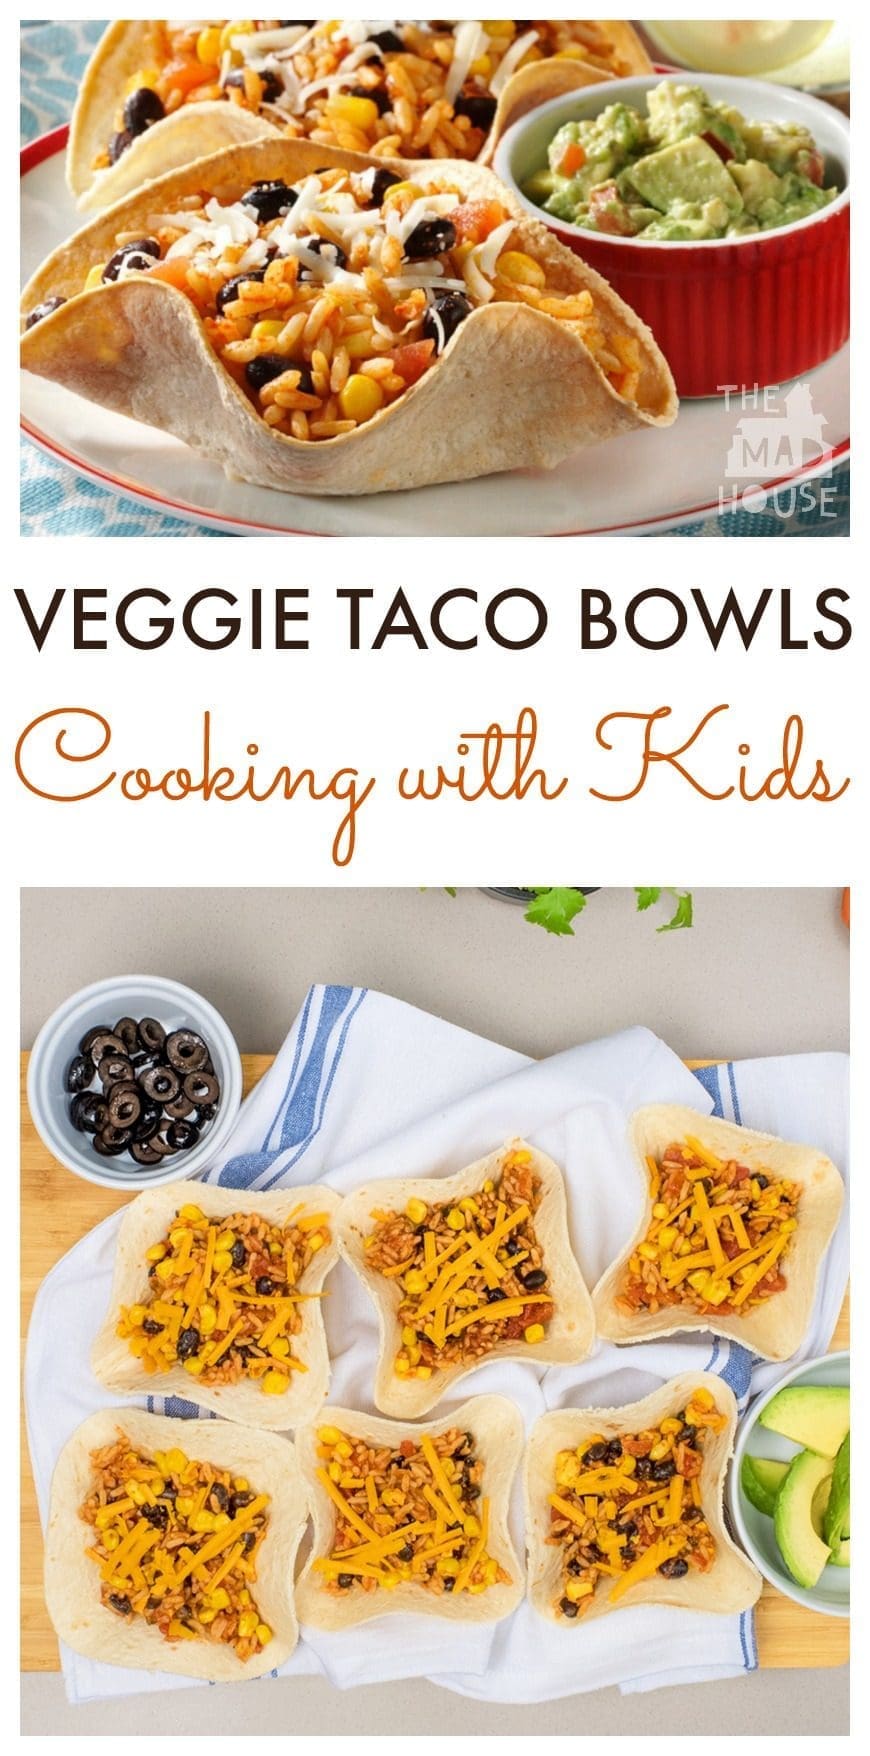 These Veggie Taco Bowls are super simple to make and perfect for cooking with the kids. A simple, delicious and versatile meat-free family meal 